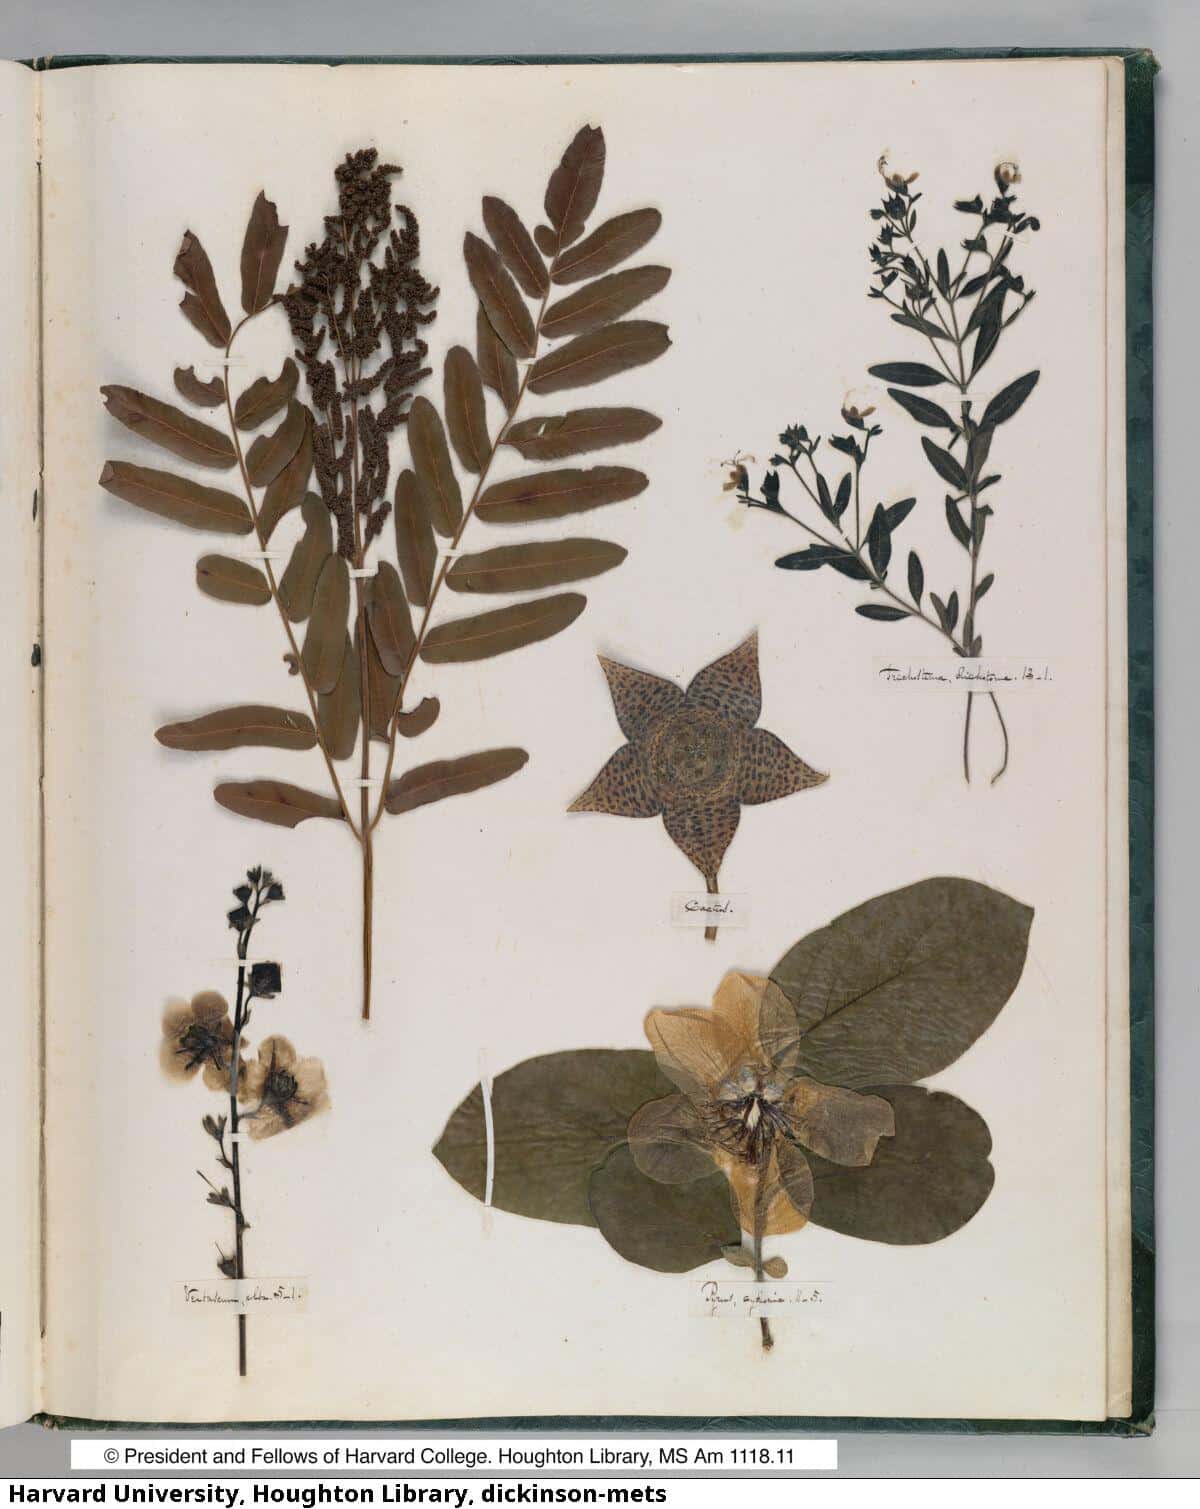 Plants arranged on a page in Emily Dickinson's herbarium